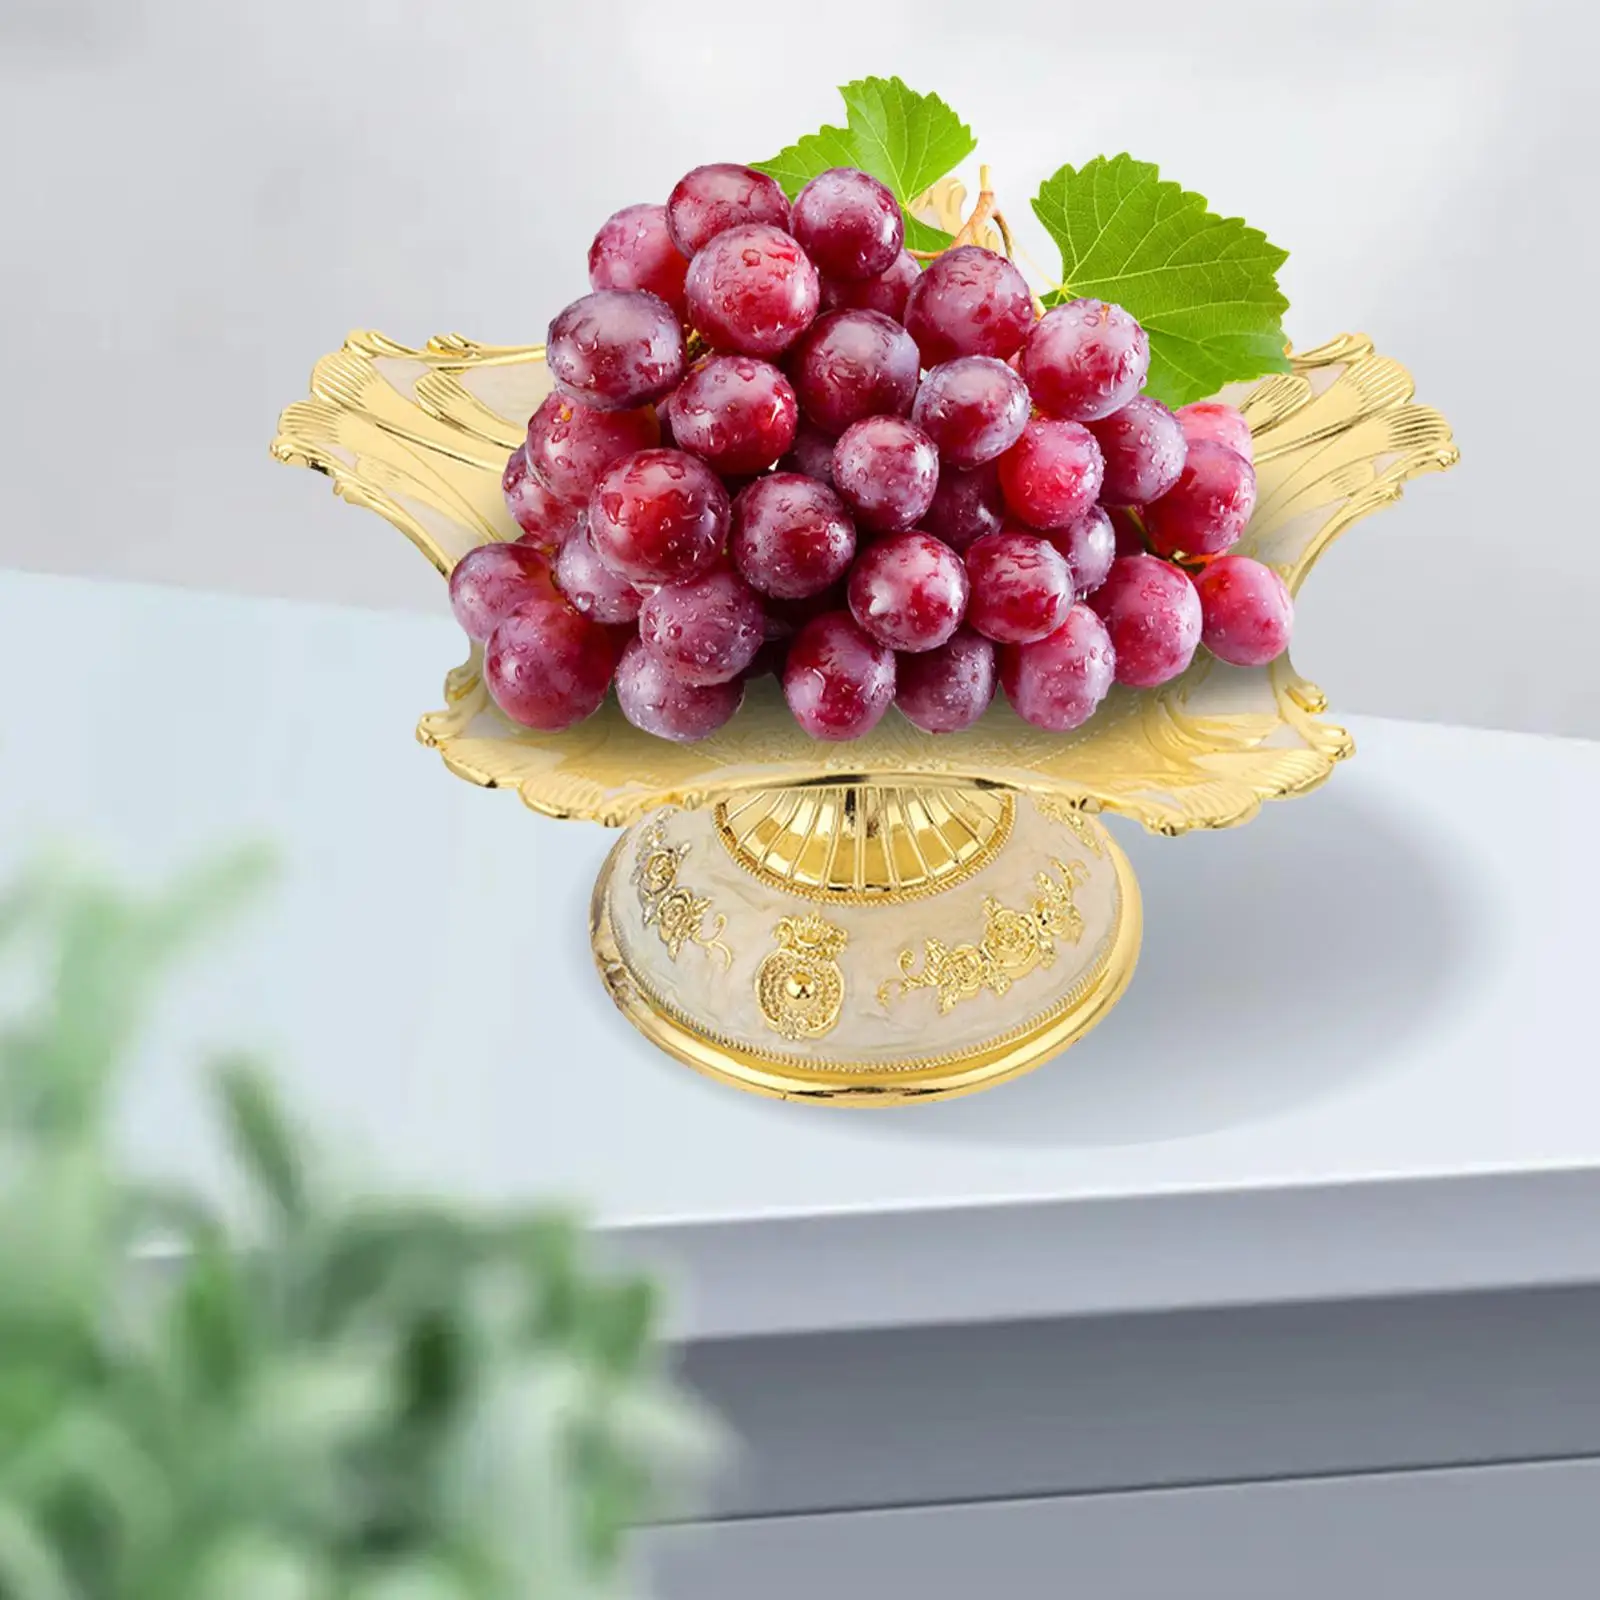 Pastry Dish Cupcake Dessert Display Plate Perfume Collection Tray Snack Dish Fruit Tray for Buddhism Table Supplies Centerpiece